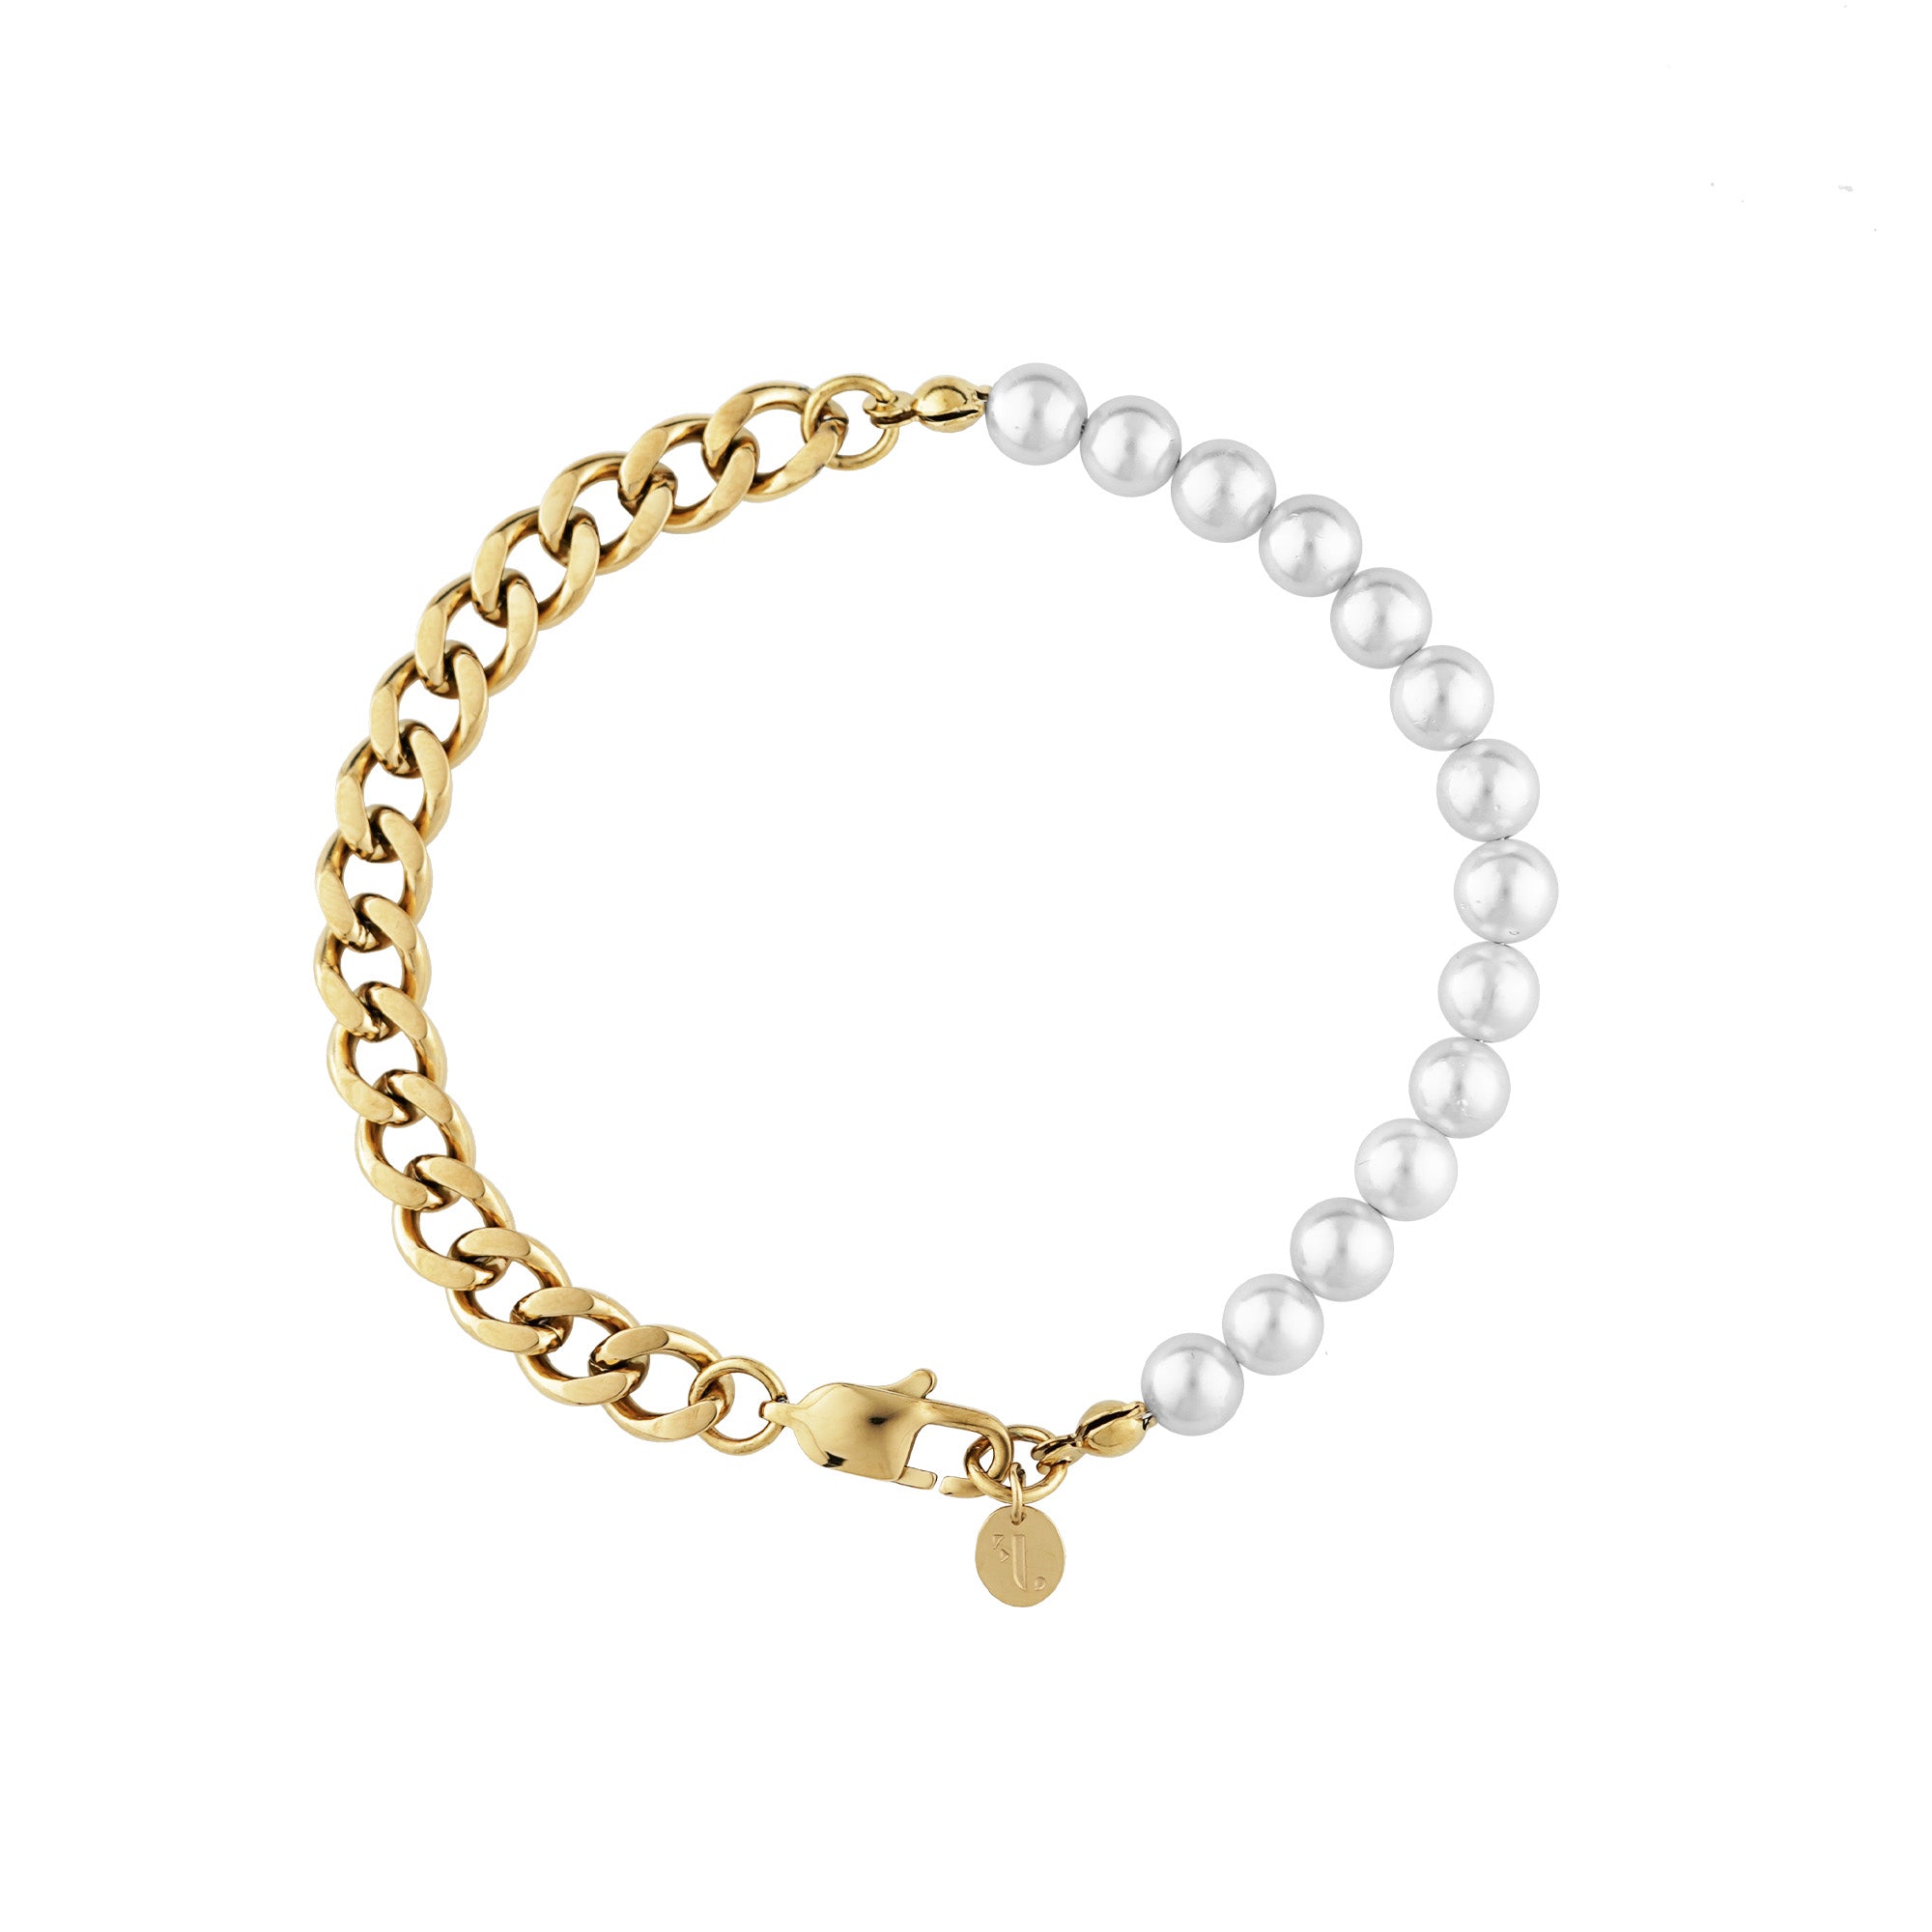 Volga men's bracelet by Five Jwlry, uniquely crafted with a combination of half gold Cuban chain and half white pearls, measuring 20cm or 23cm in length. Made from water-resistant 316L stainless steel. Hypoallergenic with a 2-year warranty.